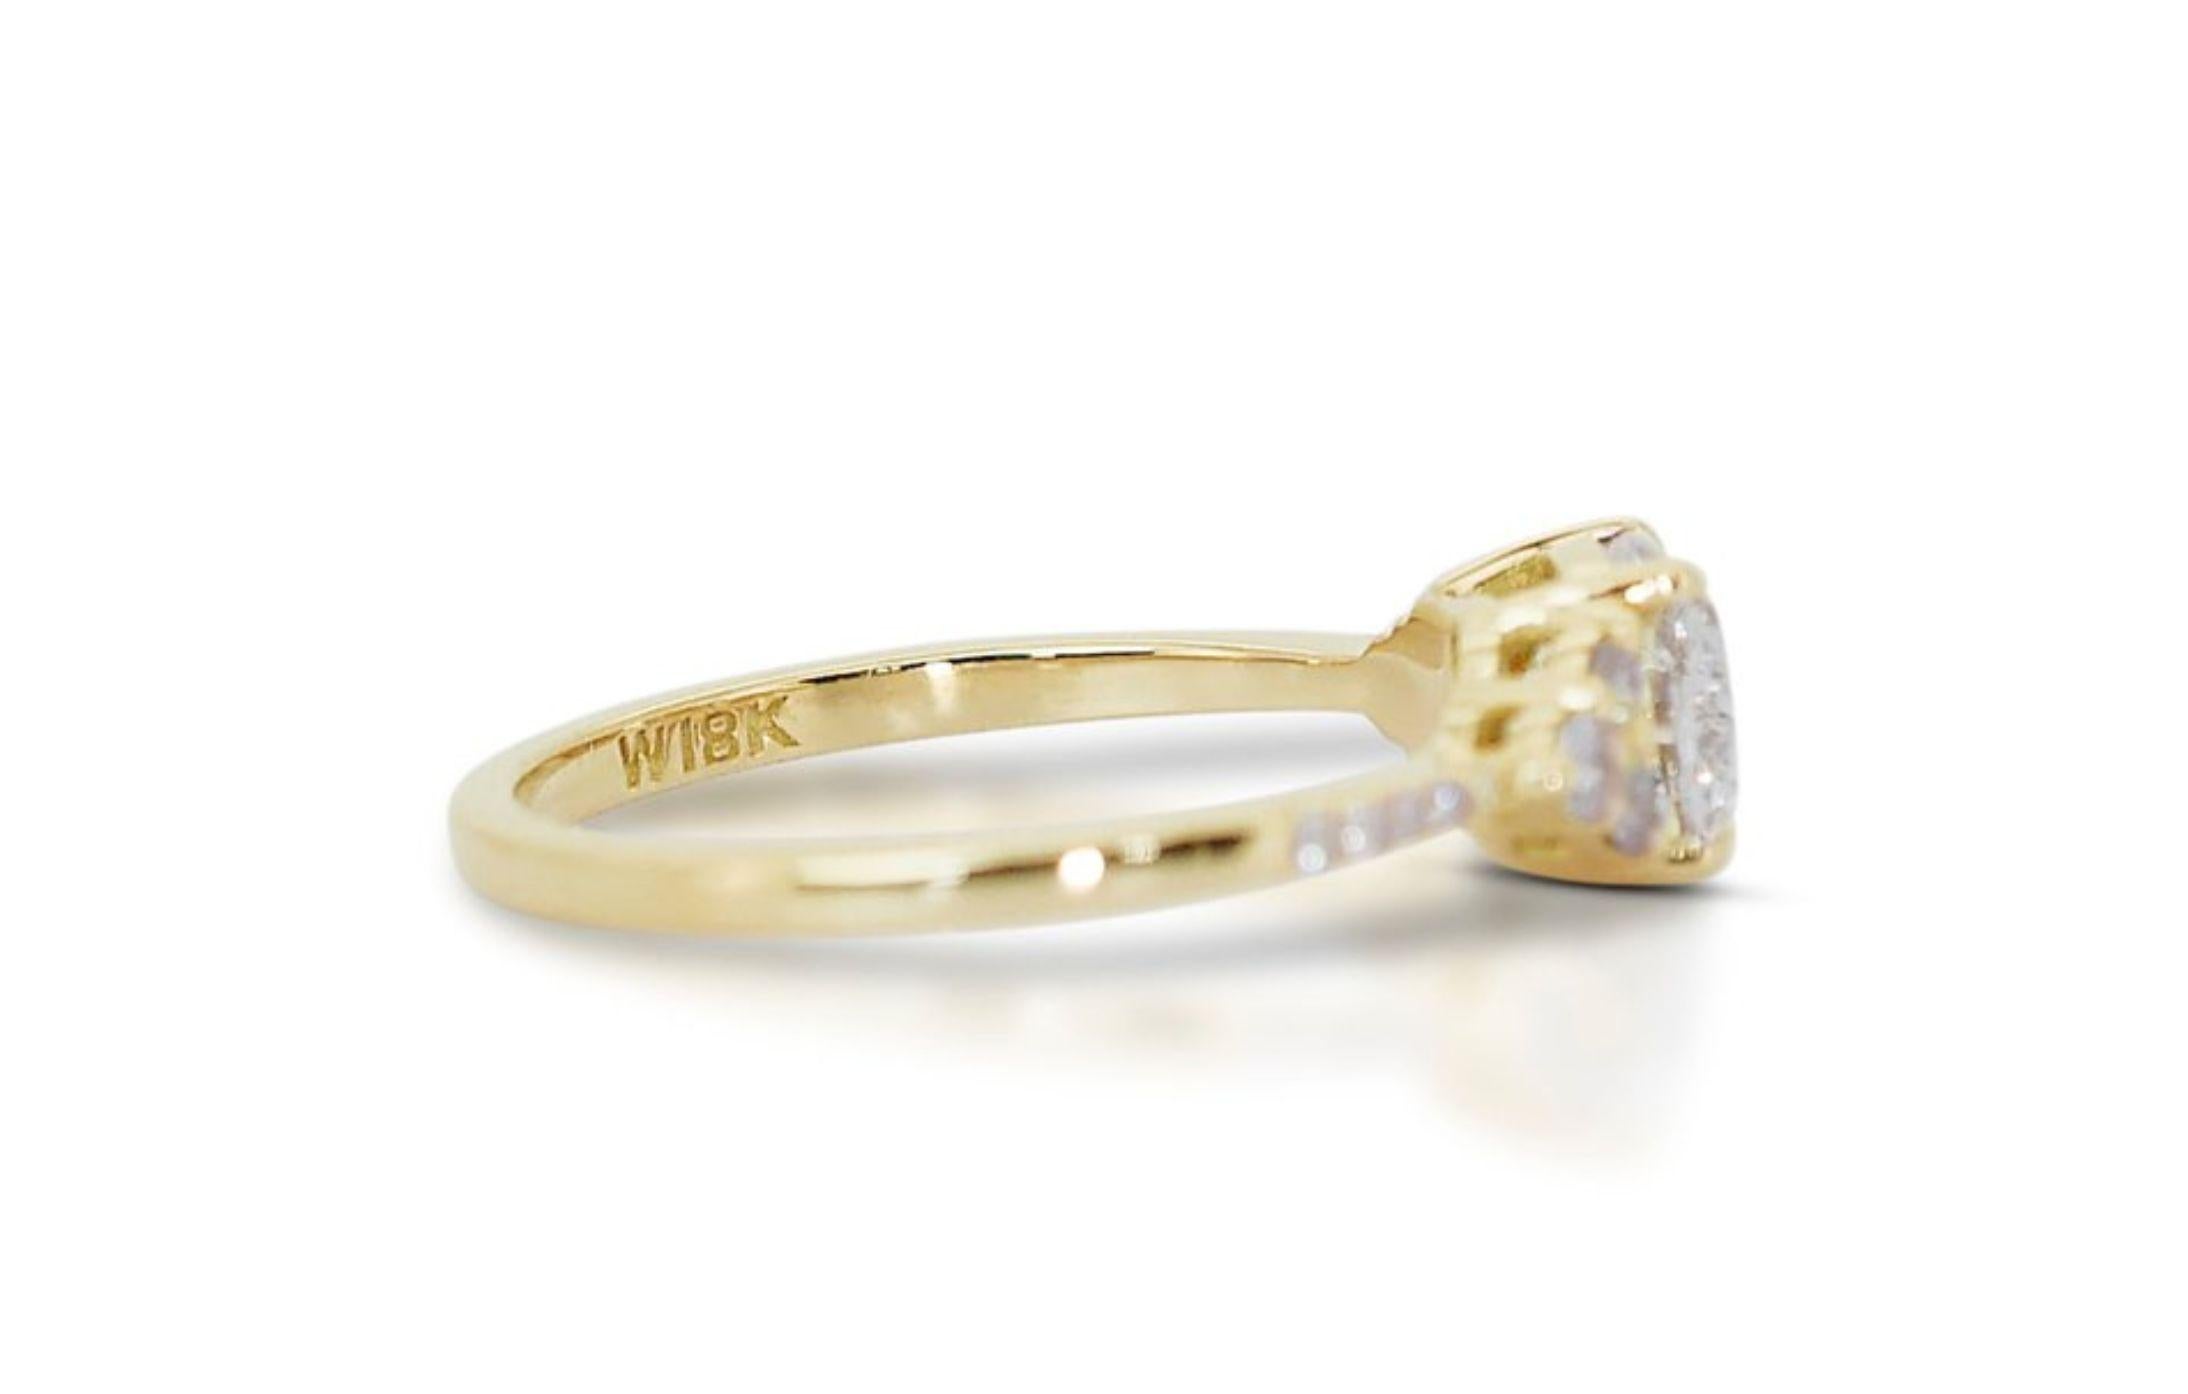 Women's 18K Yellow Gold Pave Diamond Ring with a Captivating 1.01ct Cushion-cut Diamond